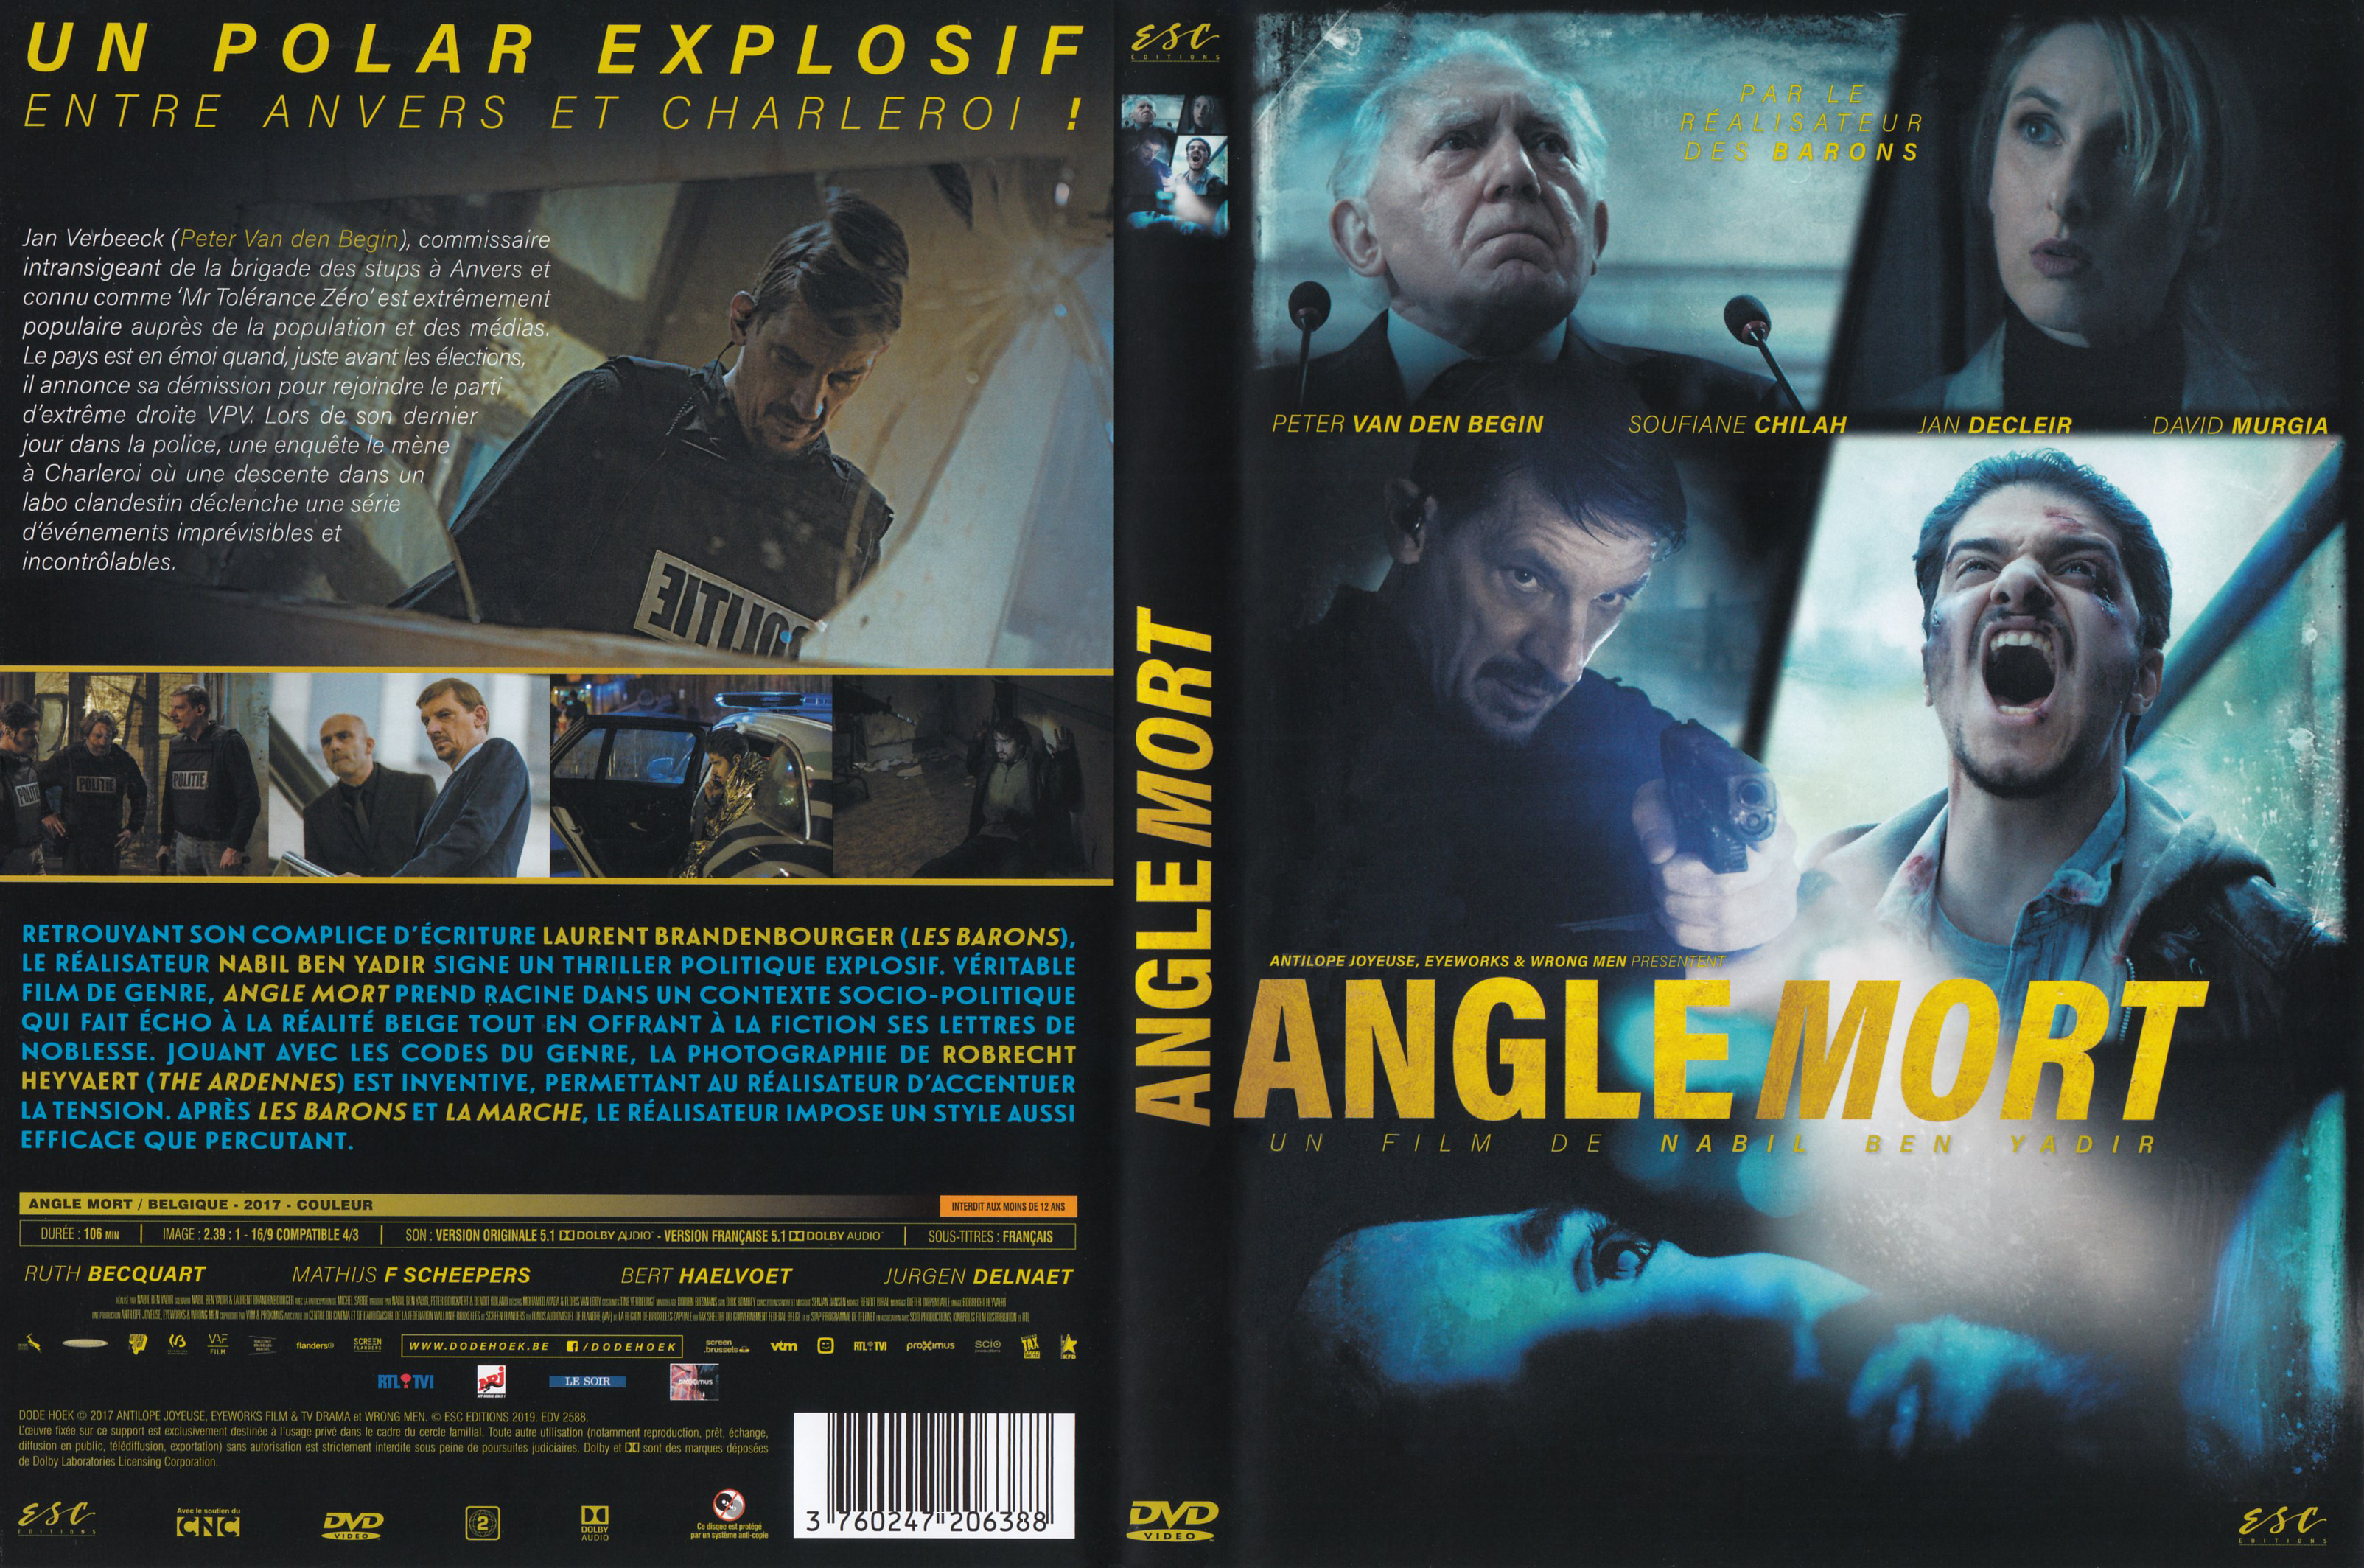 Jaquette DVD Angle mort